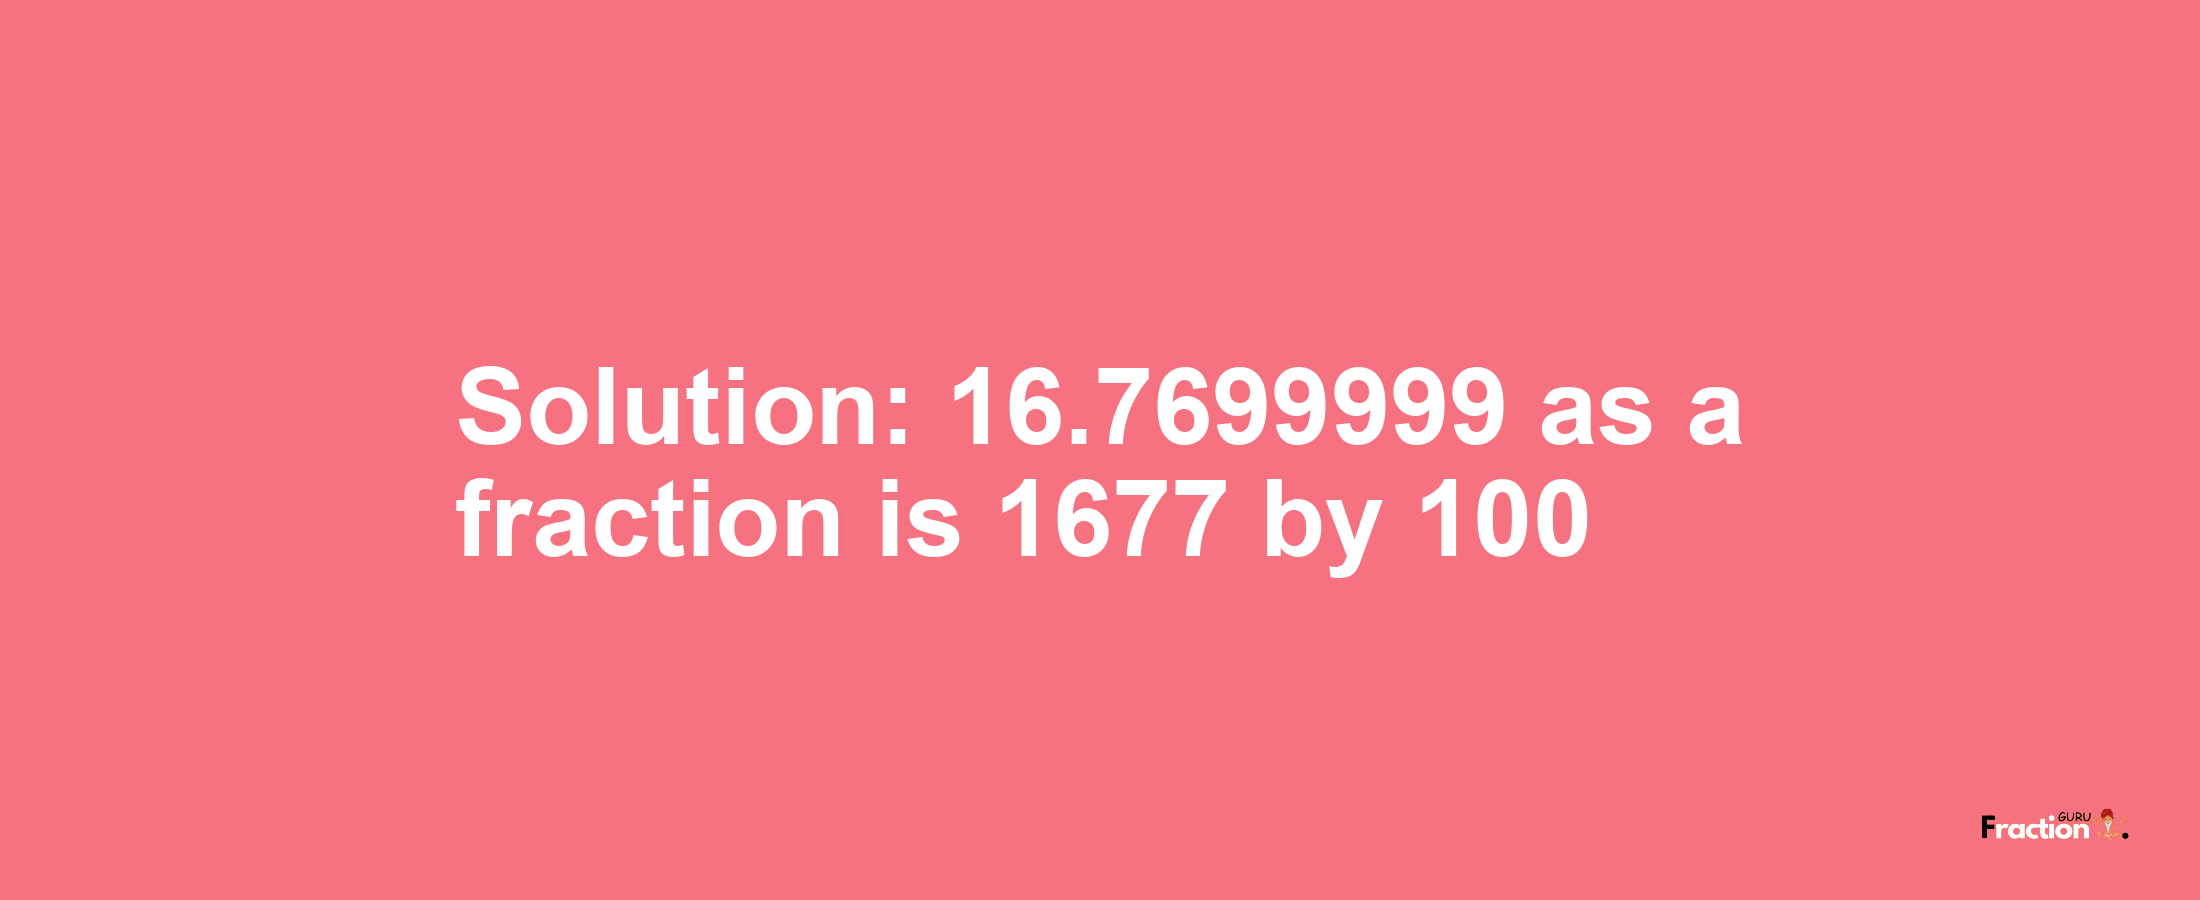 Solution:16.7699999 as a fraction is 1677/100